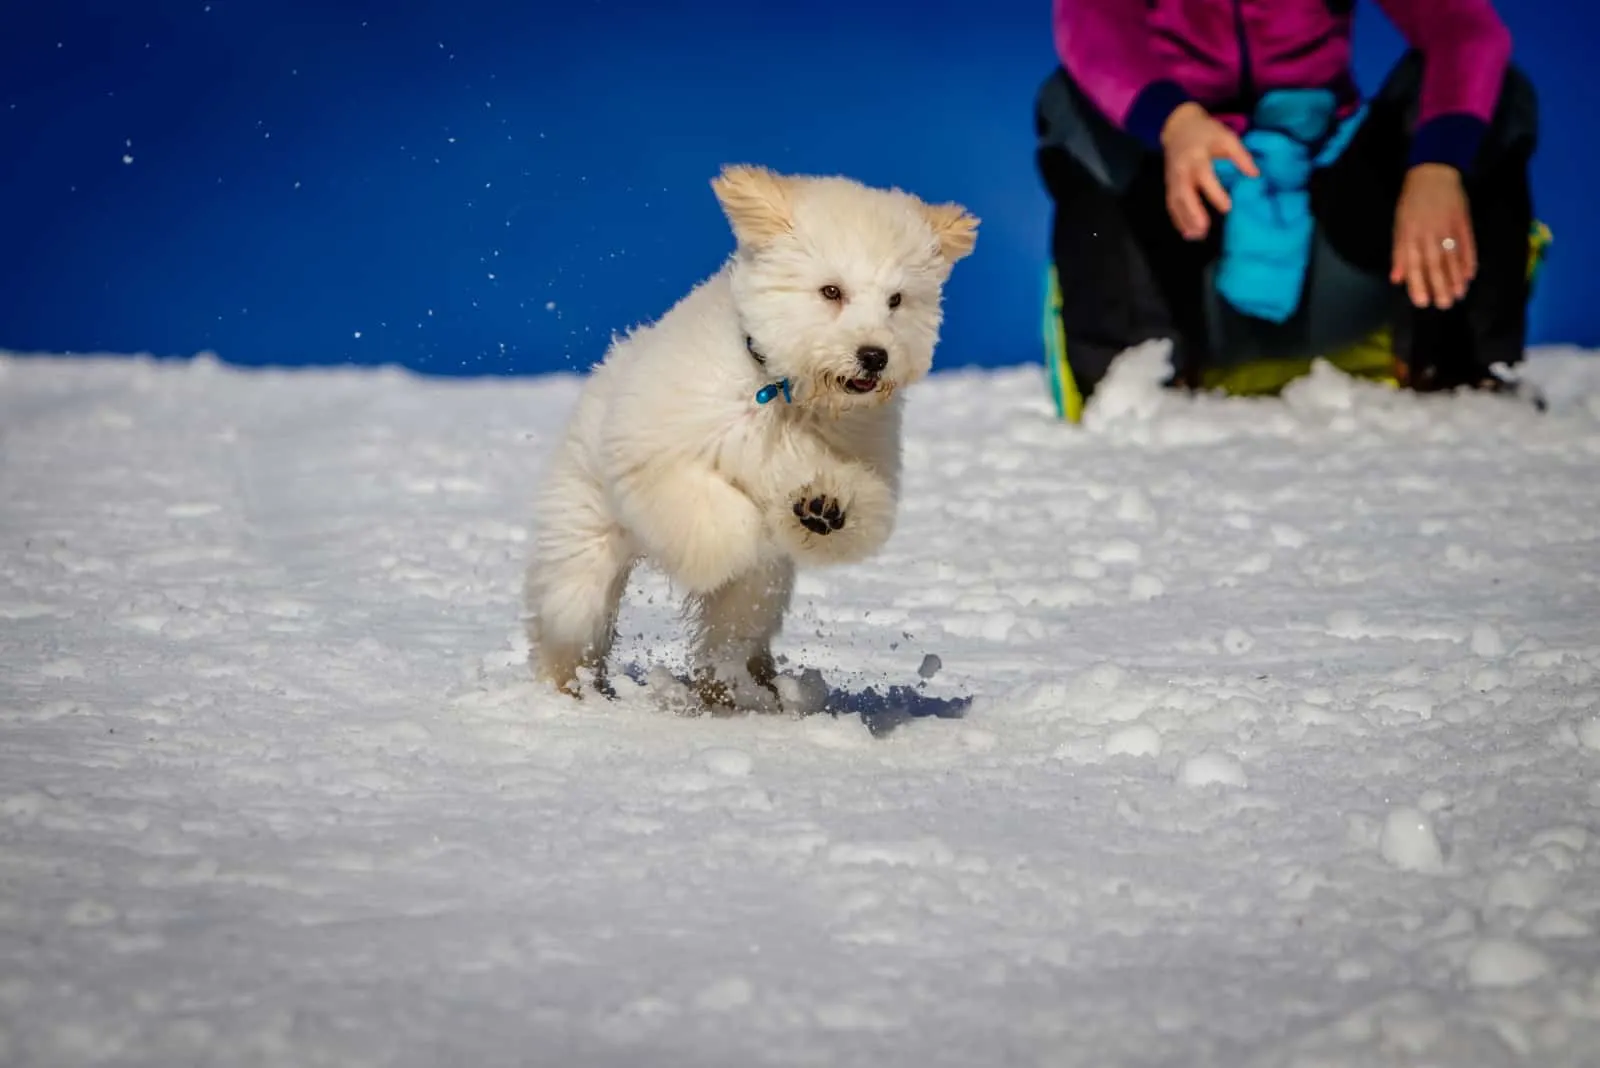 An extremely cute puppy golden doodle playing with snow balls